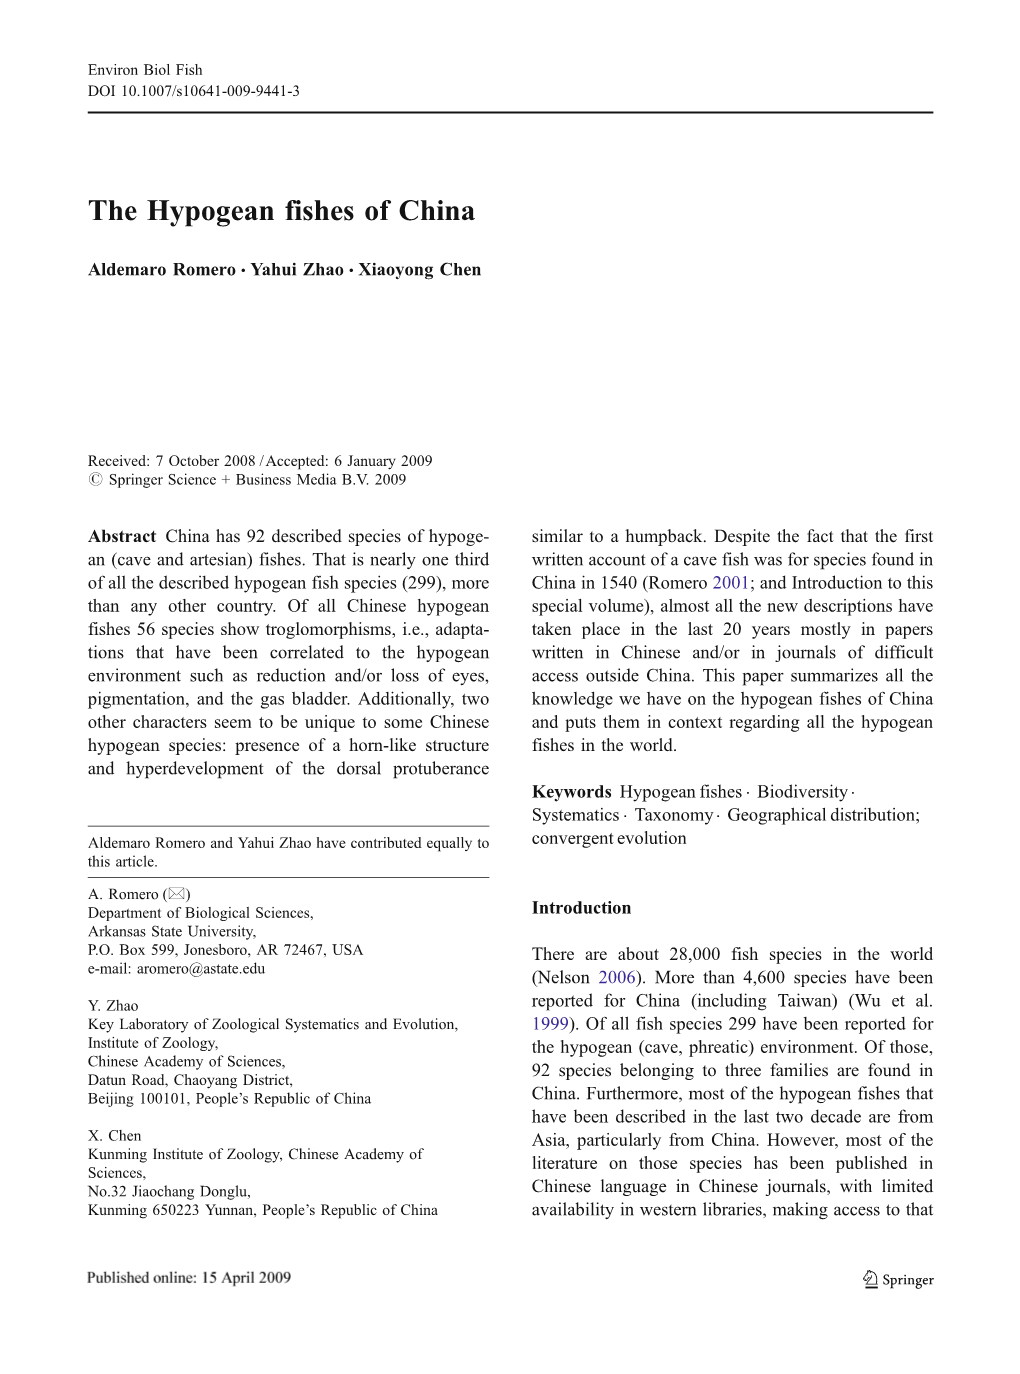 The Hypogean Fishes of China